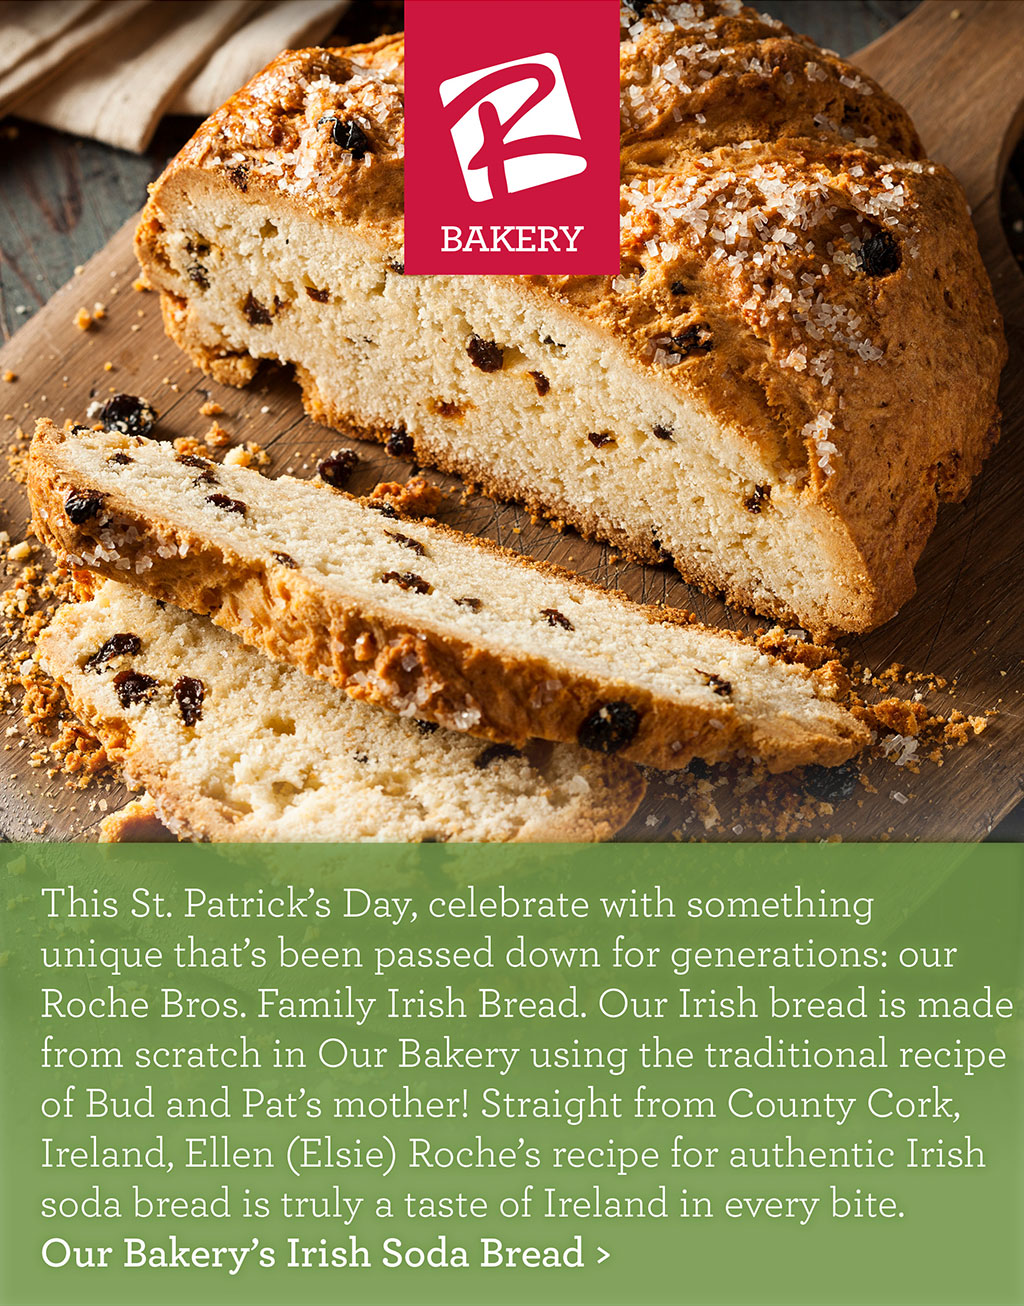 OUR BAKERY - This St. Patrick's Day, celebrate with something unique that's been passed down for generations: our Roche Bros. Family Irish Bread. Our Irish bread is made from scratch in Our Bakery using the traditional recipe of Bud and Pat's mother! Straight from County Cork, Ireland, Ellen (Elsie) Roche's recipe for authentic Irish soda bread is truly a taste of Ireland in every bite. Our Bakery's Irish Soda Bread >